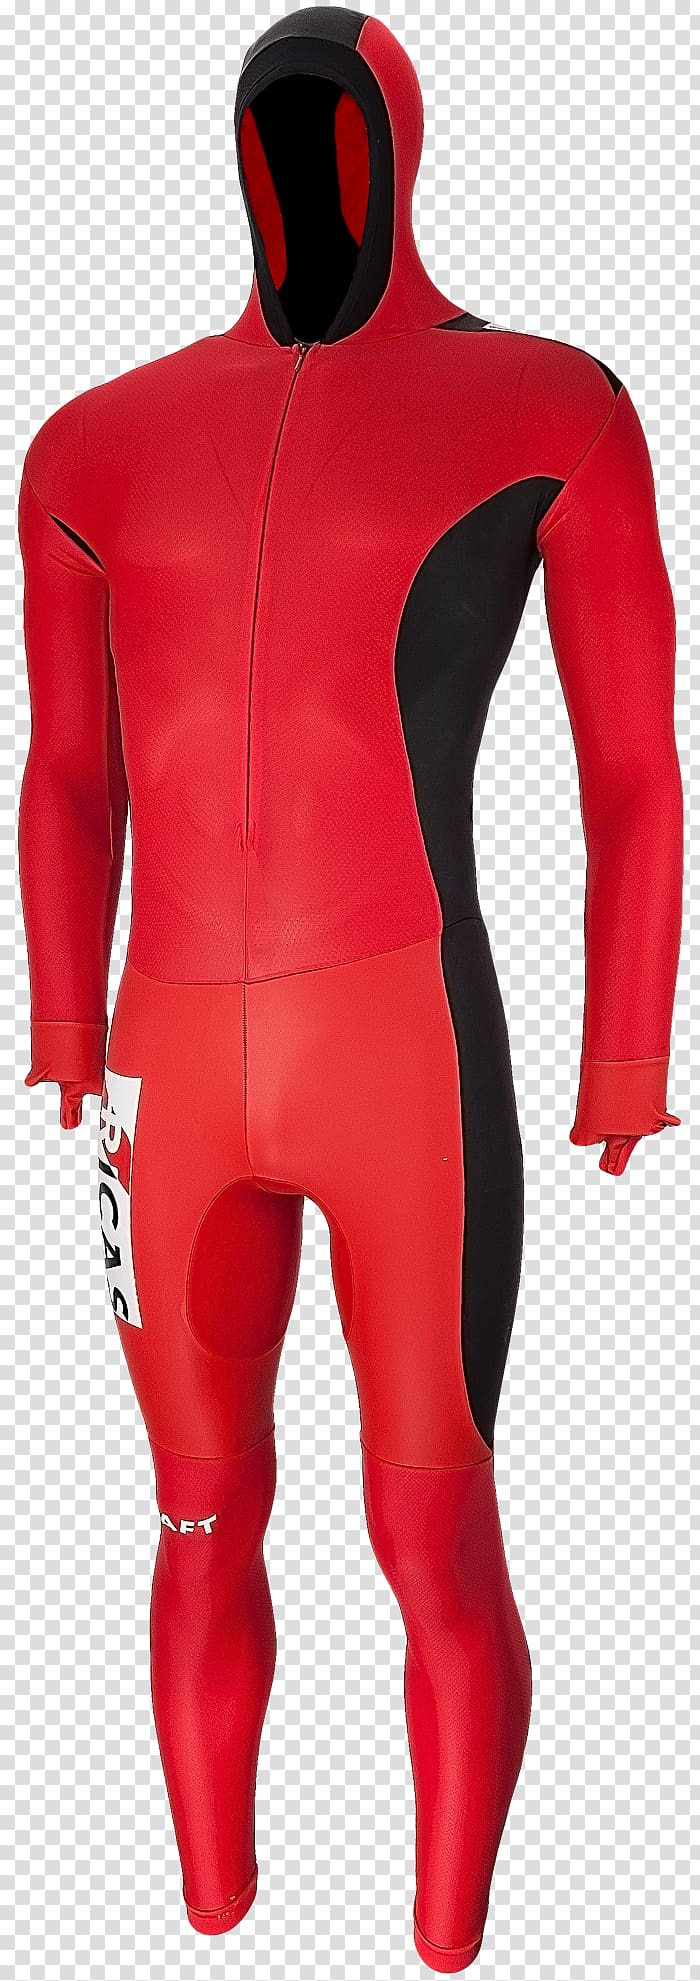 Schaatspak Clothing Ice skating Wetsuit Product, Speed Skating transparent background PNG clipart